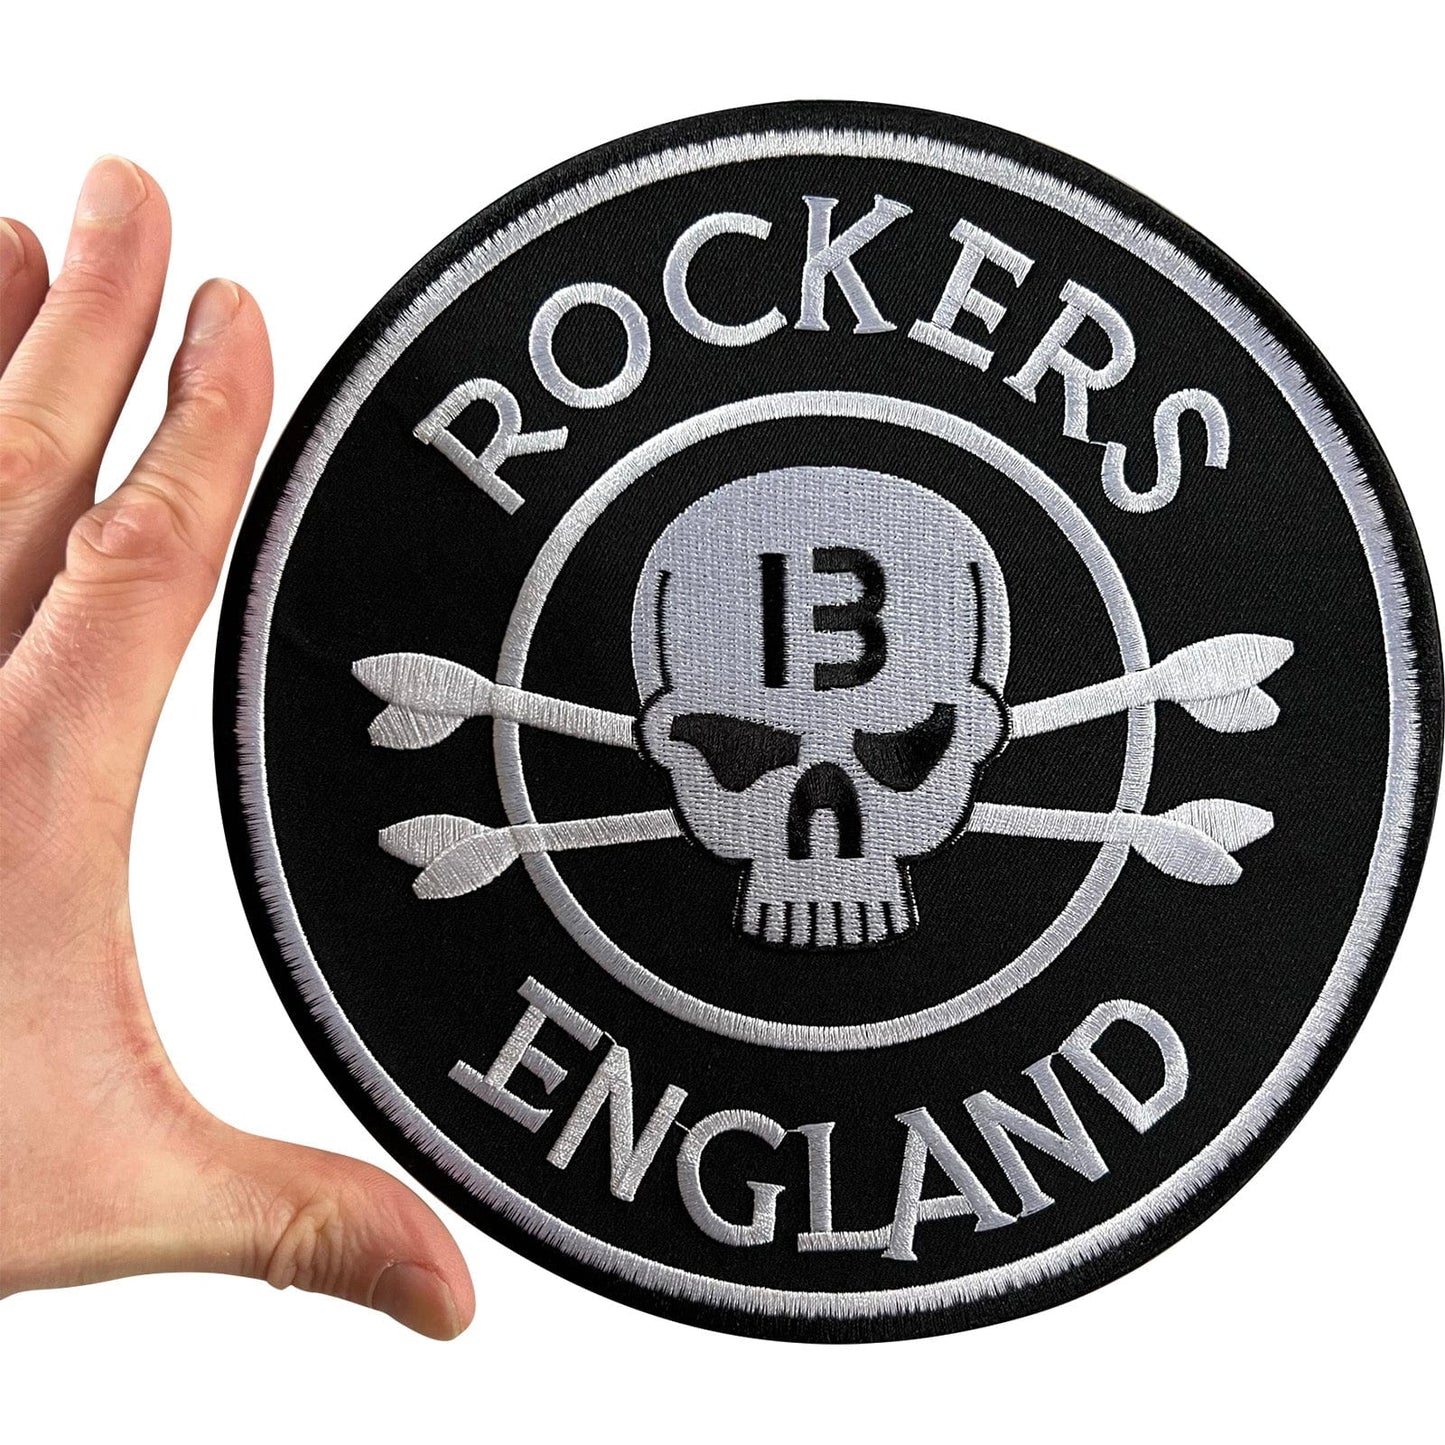 Large Rockers England Skull 13 Patch Iron On Sew On Jacket Big Embroidered Badge